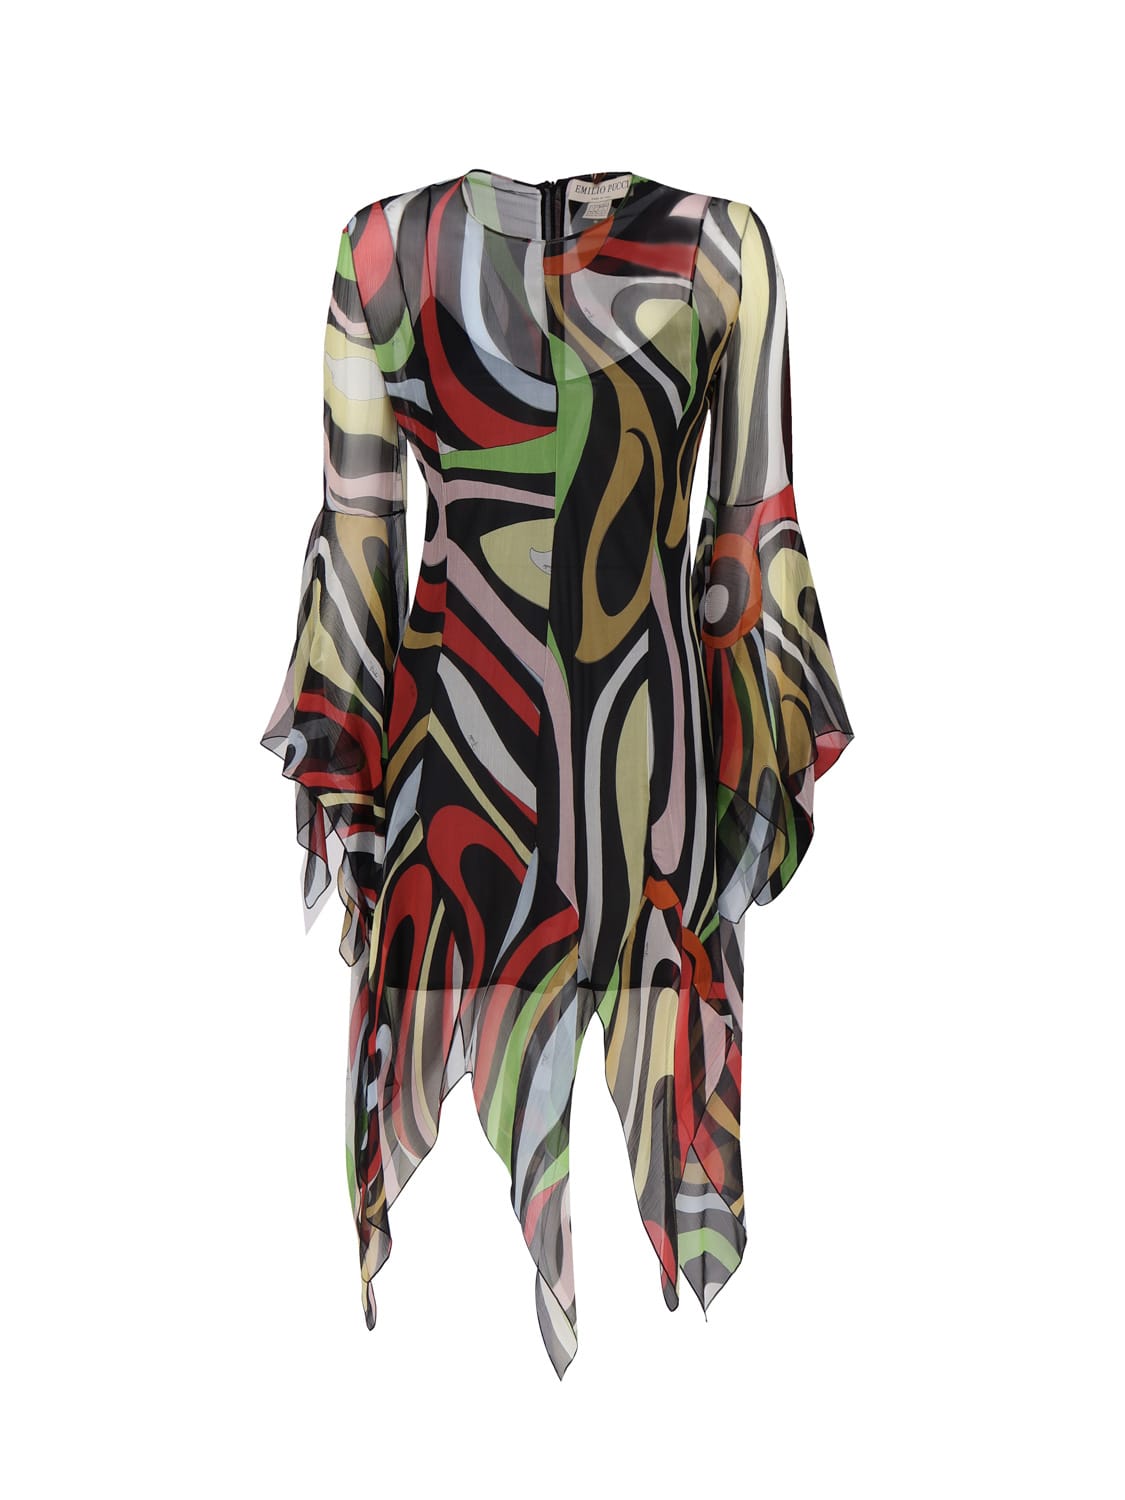 EMILIO PUCCI SILK DRESS WITH MARBLE PRINT